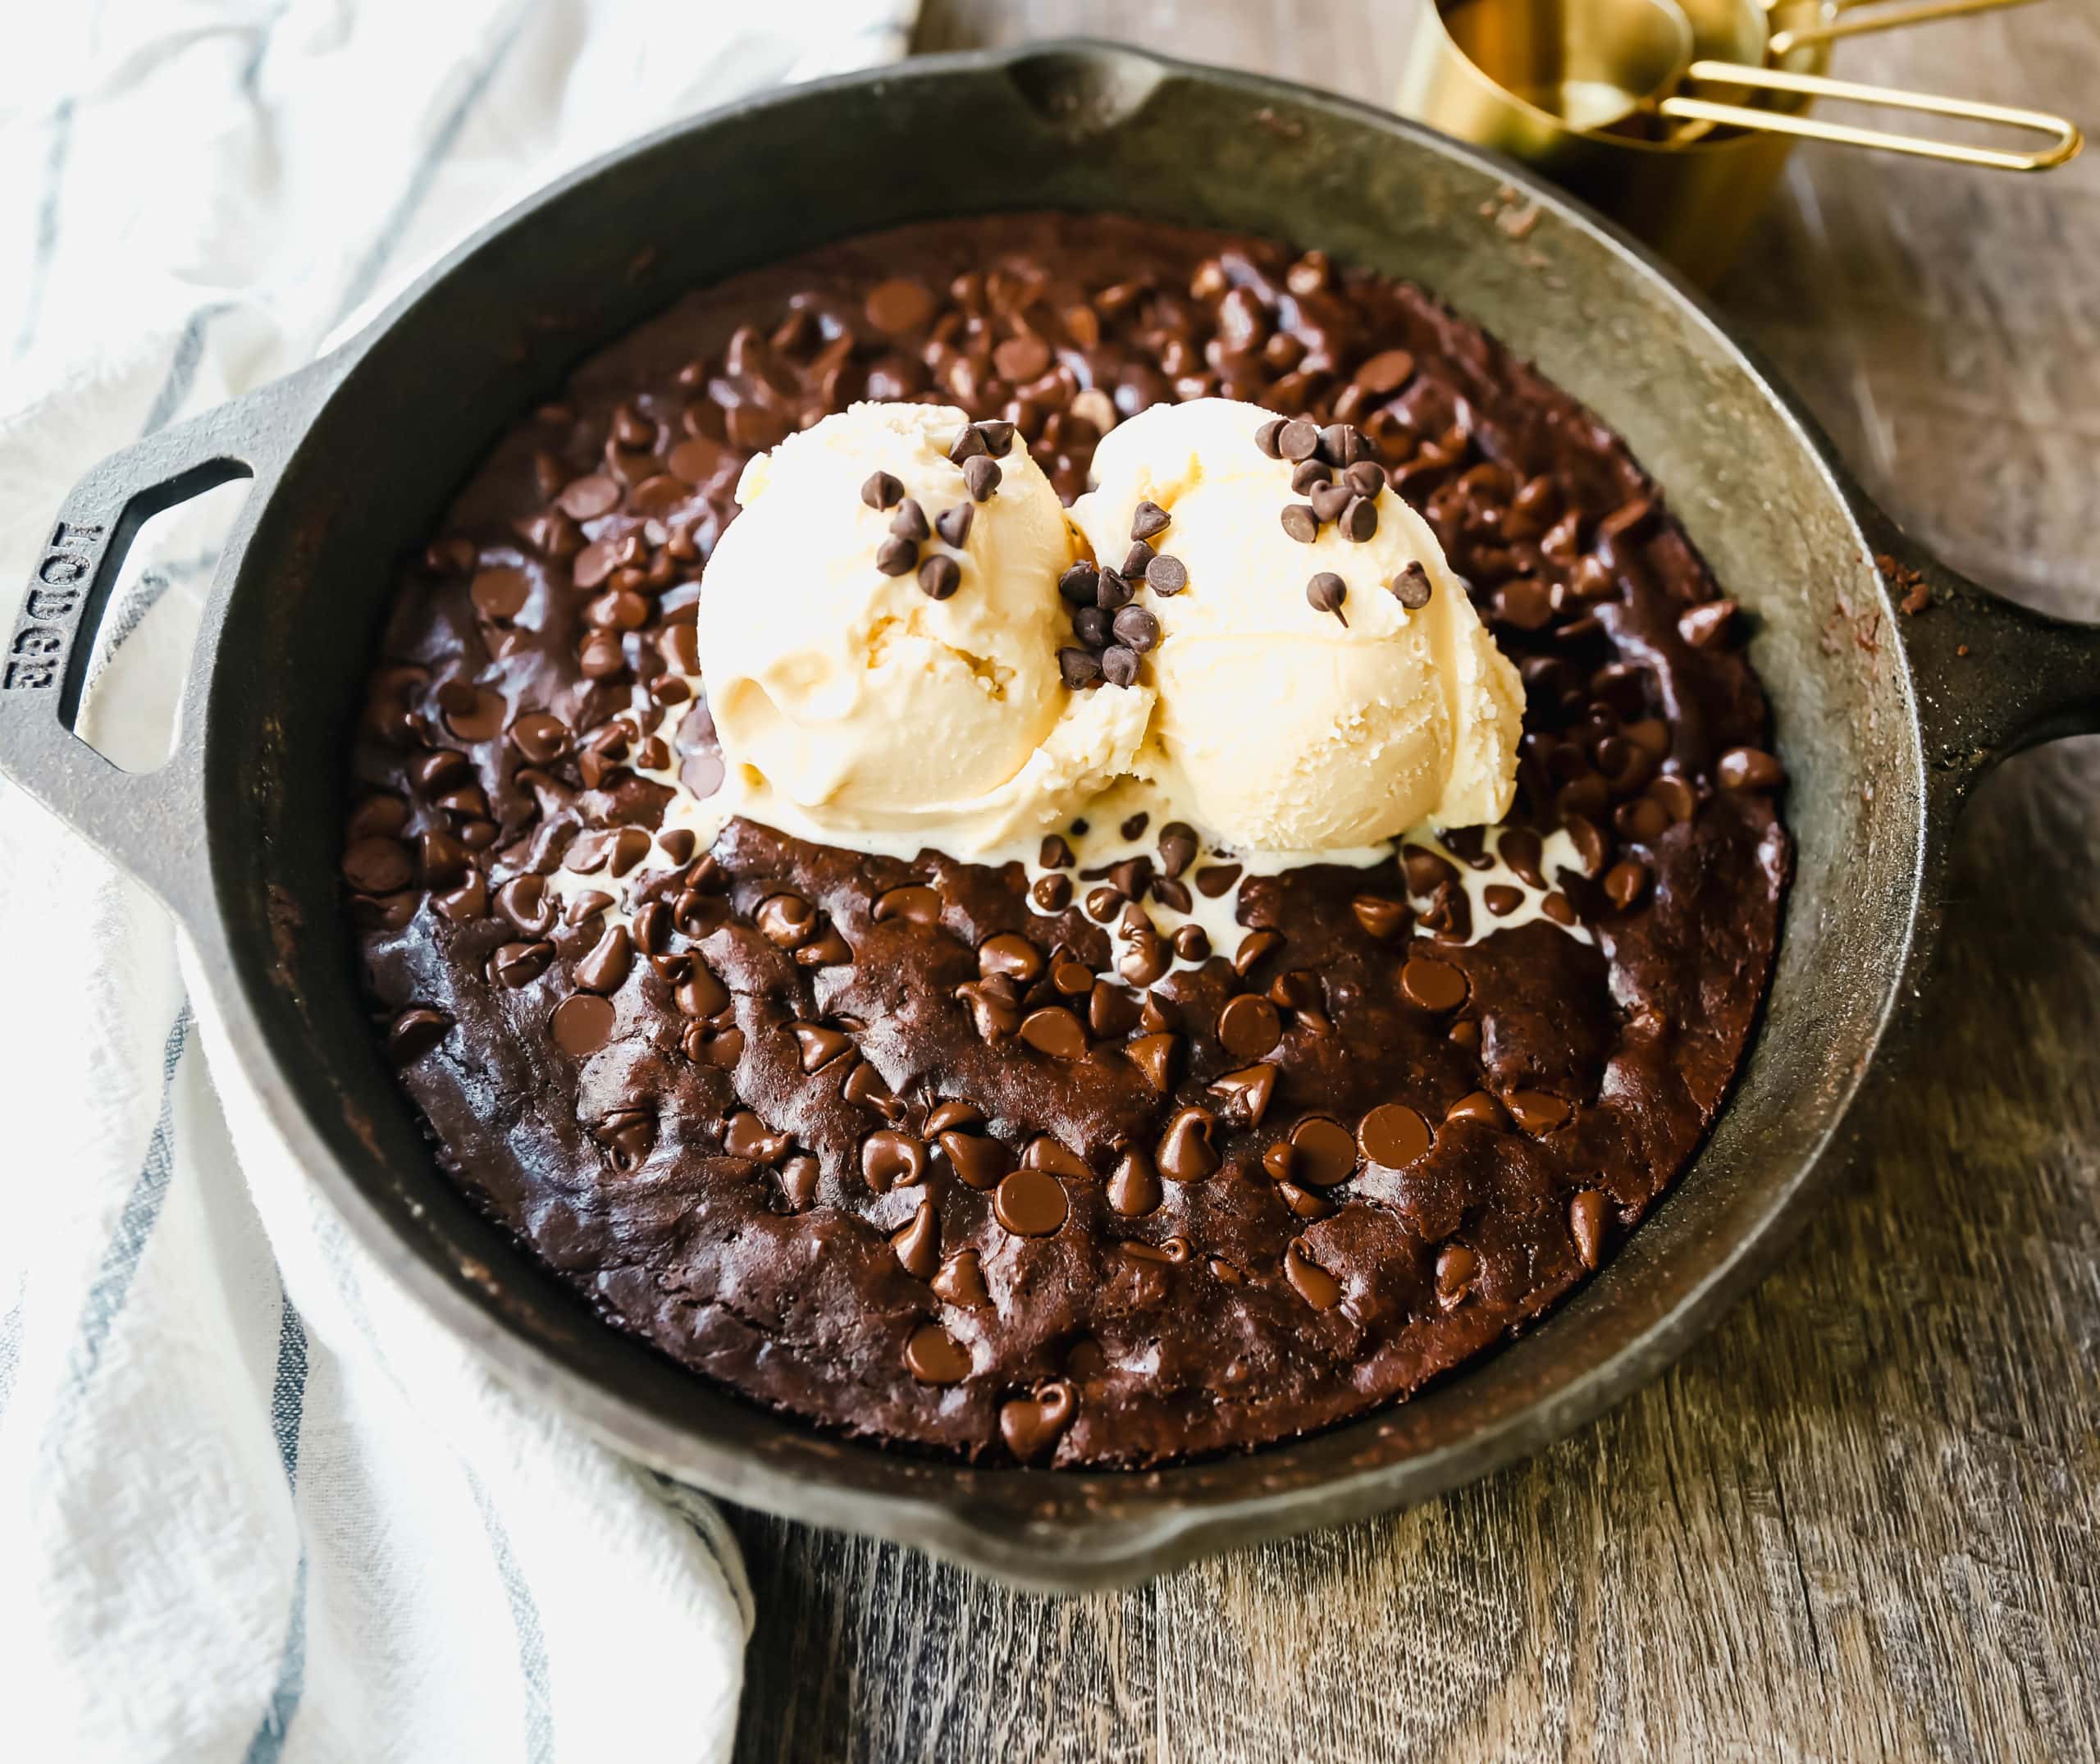 Double Chocolate Chocolate Chip Skillet Cookie Rich, chewy double chocolate chip cookie baked in a cast-iron skillet and topped with ice cream. www.modernhoney.com #doublechocolatechipskilletcookie #skilletcookie